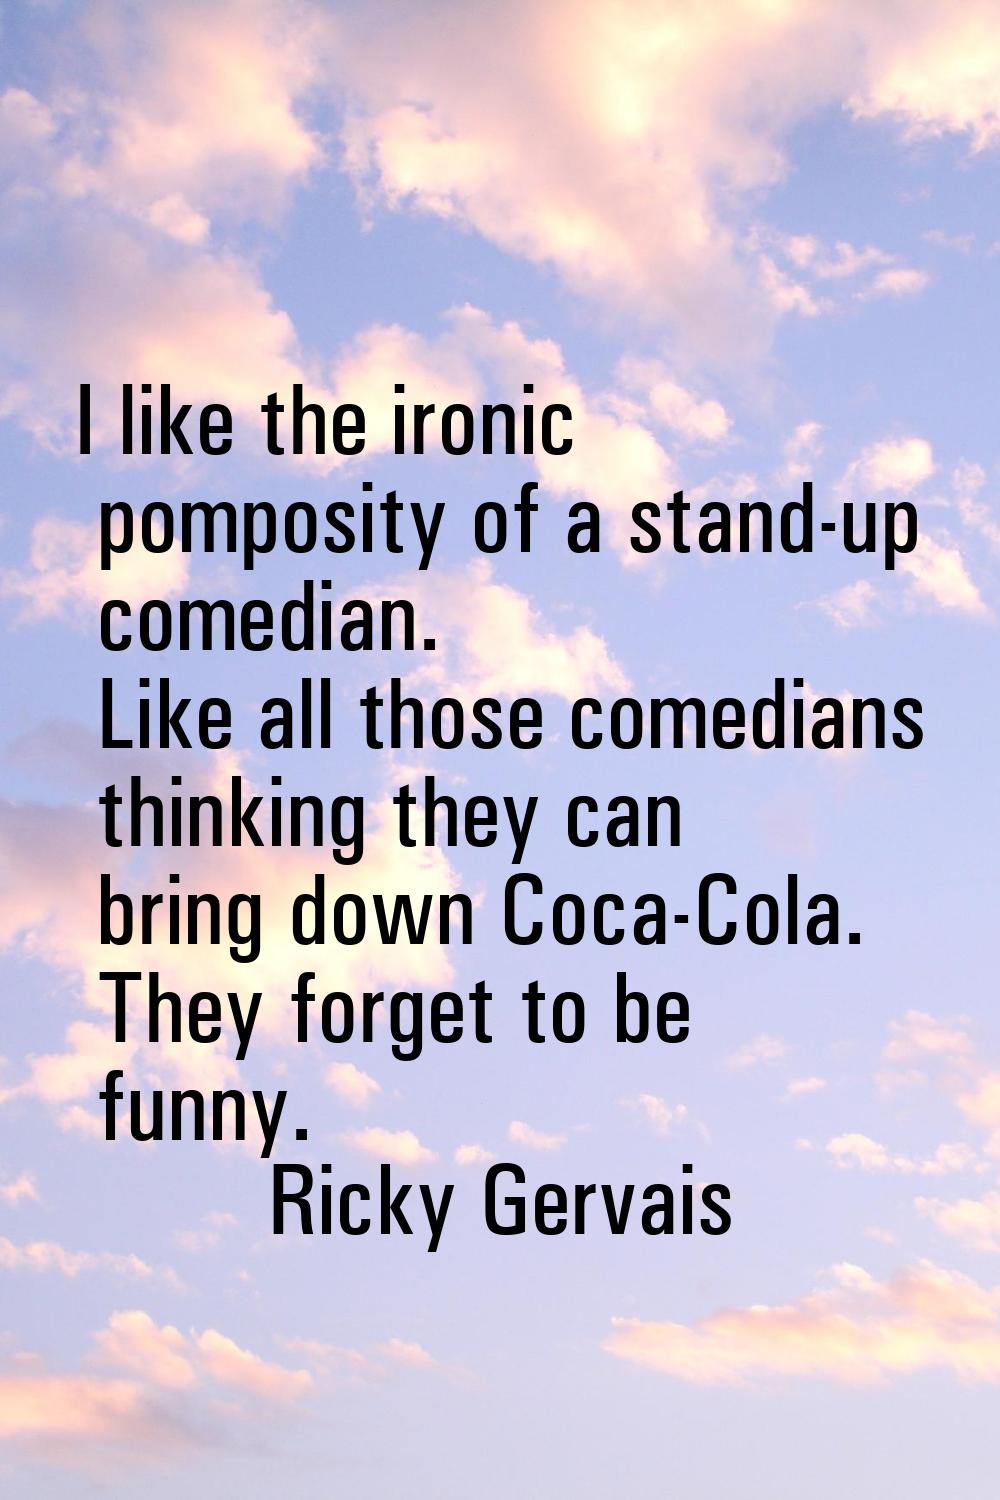 I like the ironic pomposity of a stand-up comedian. Like all those comedians thinking they can brin